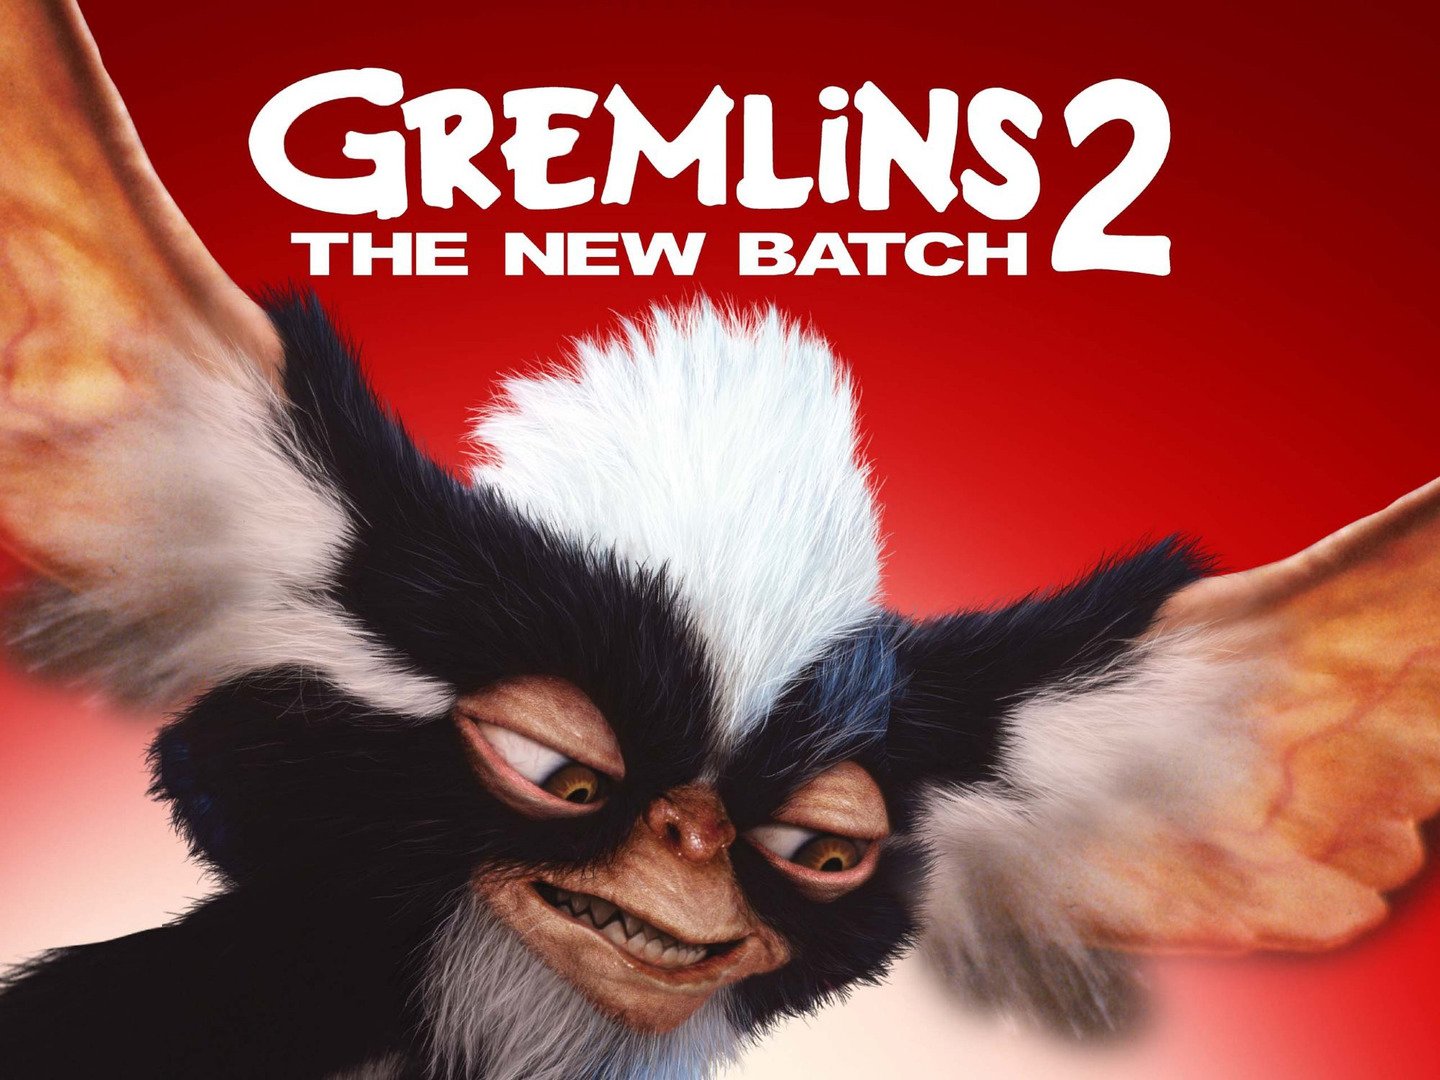 45-facts-about-the-movie-gremlins-2-the-new-batch